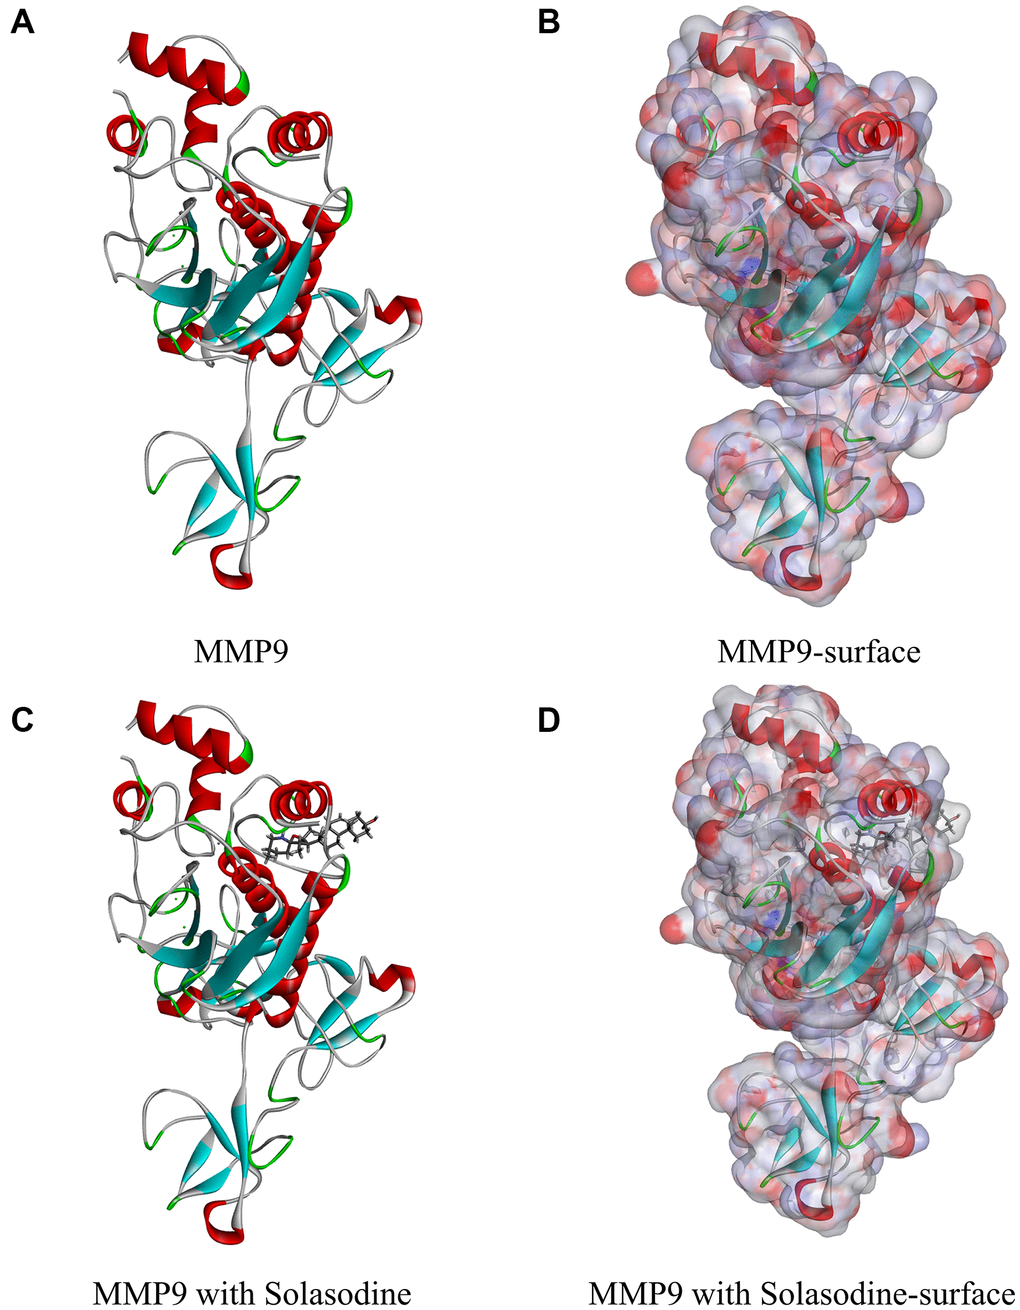 Molecular structure of MMP9. (A) Initial molecular structure. (B) Binding area surface. Blue and red indicate positive and negative charges, respectively. (C) Molecular structure of the MMP9–solasodine complex. (D) Molecular structure of the MMP9–solasodine complex with surface. Blue and red indicate positive and negative charges, respectively.